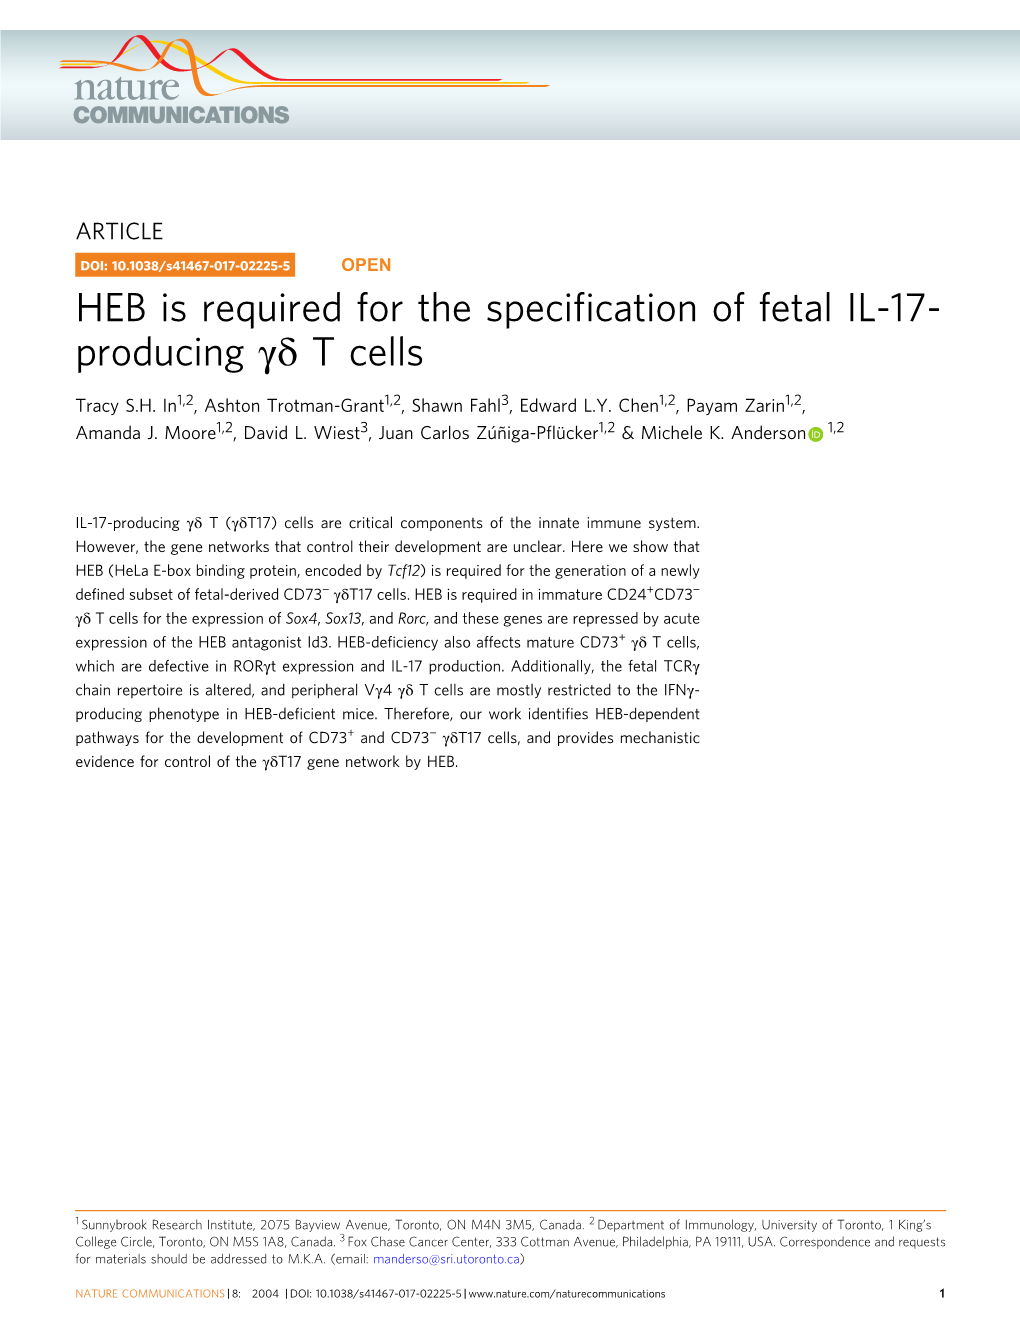 HEB Is Required for the Specification of Fetal IL-17-Producing Γδ T Cells